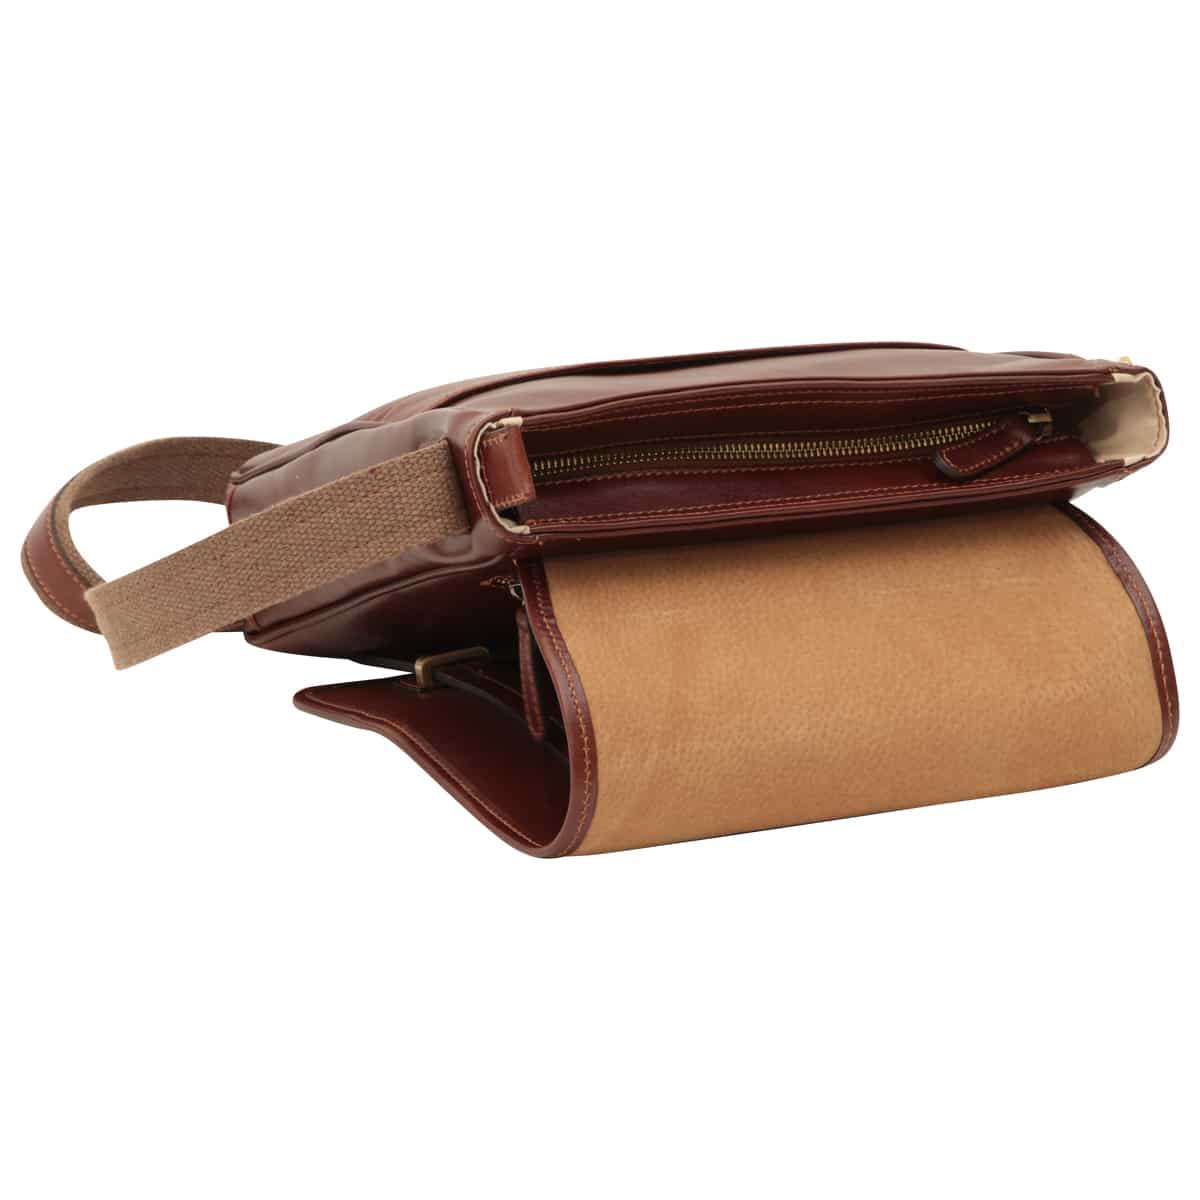 Medium leather bag with double magnetic closure - Brown  | 406589MA UK | Old Angler Firenze